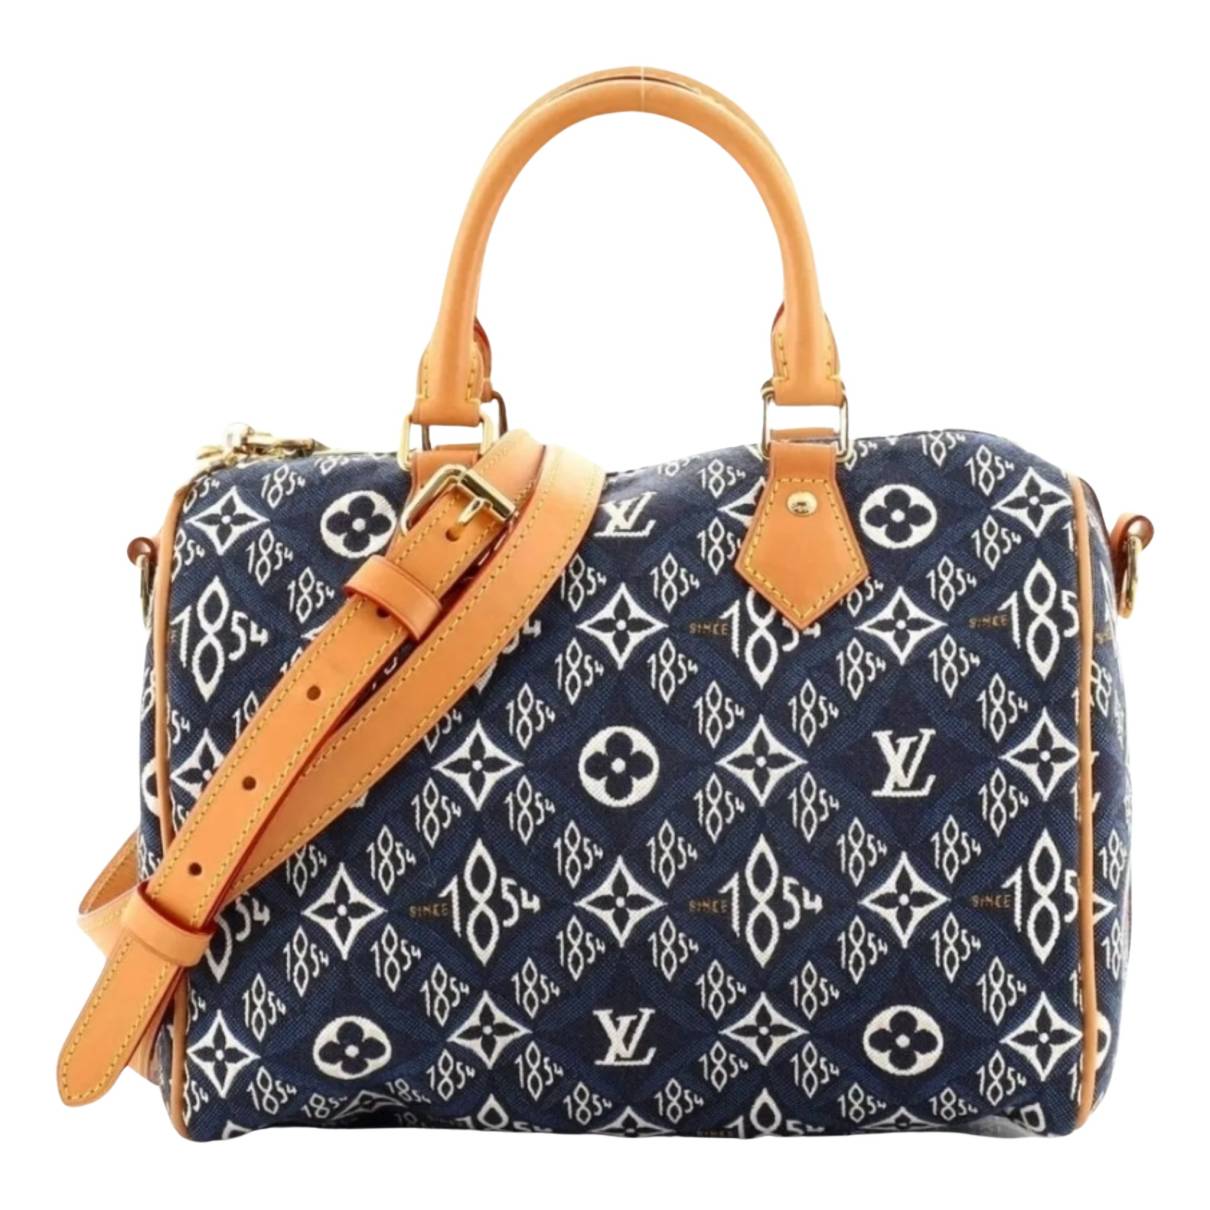 Speedy 25 bandouliere  Women's bags by style, Louis vuitton